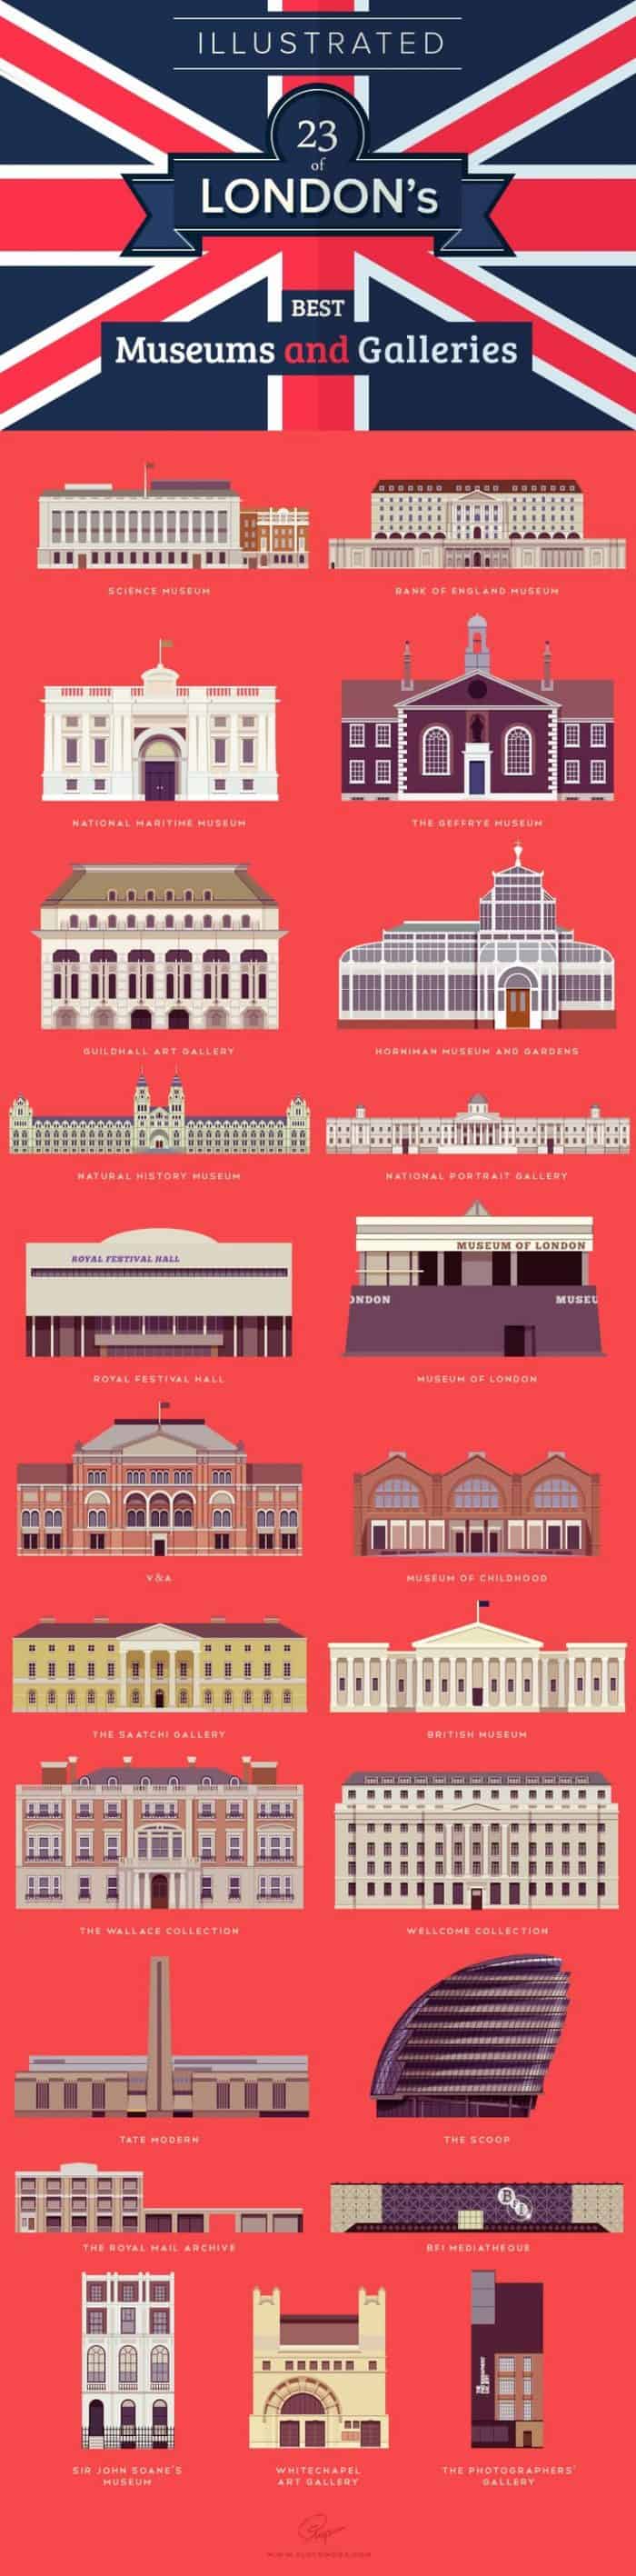 Top 23 Museums in London Infographic